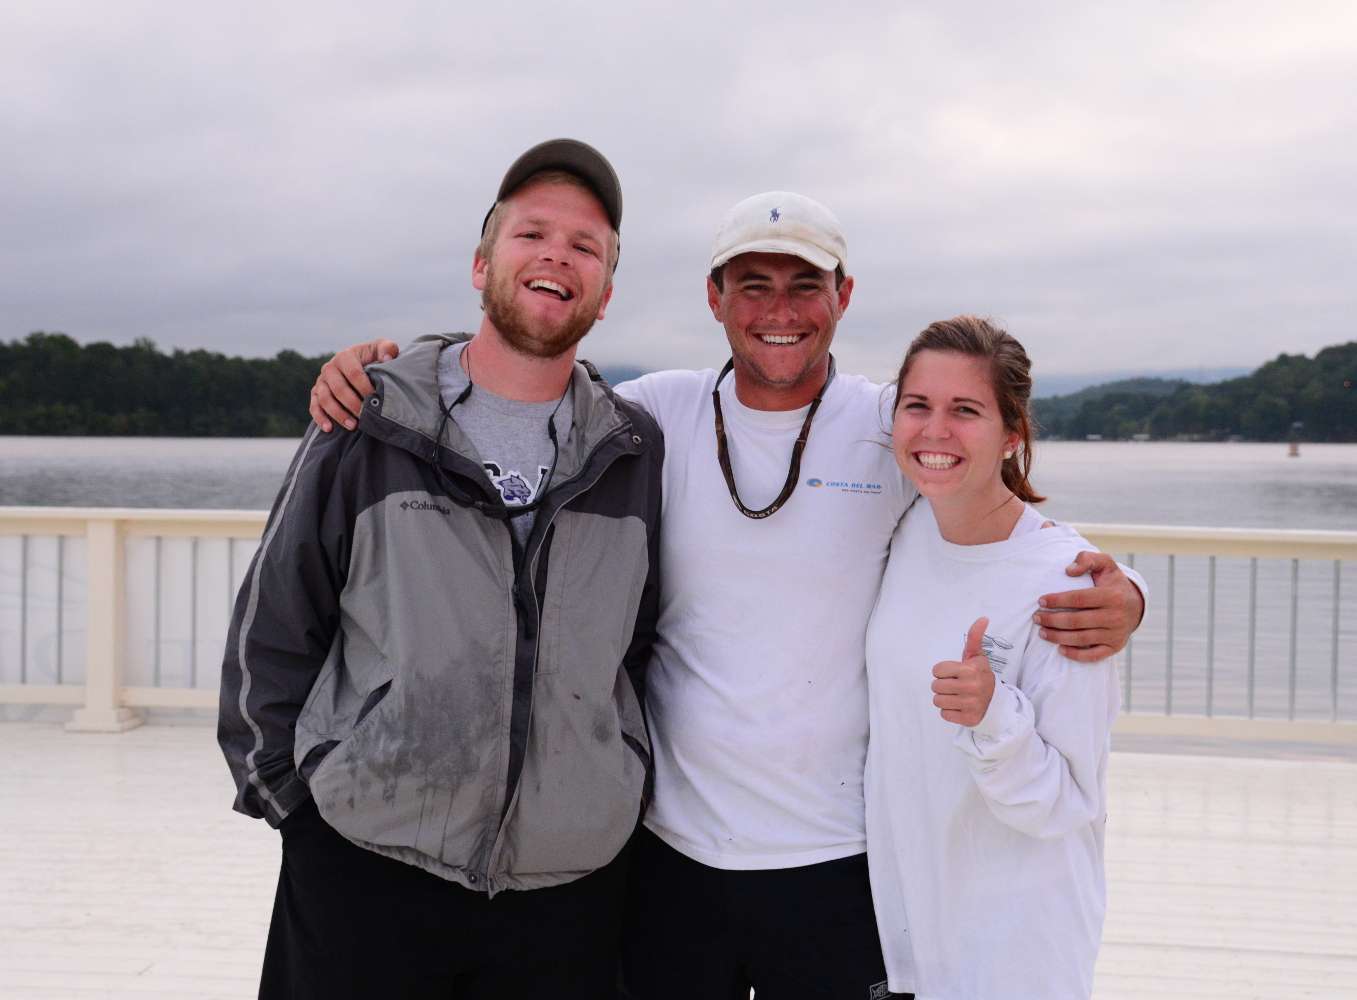 Justin Atkins, center, of Mississippi State finished in 31st place, but he didn't head home. Instead, he is going out on a boat with Young Harris resident and College B.A.S.S. alum Brad Rutherford and Atkins' girlfriend, Tessa Johnson, to watch Parker and Roberts of Bethel fish today.